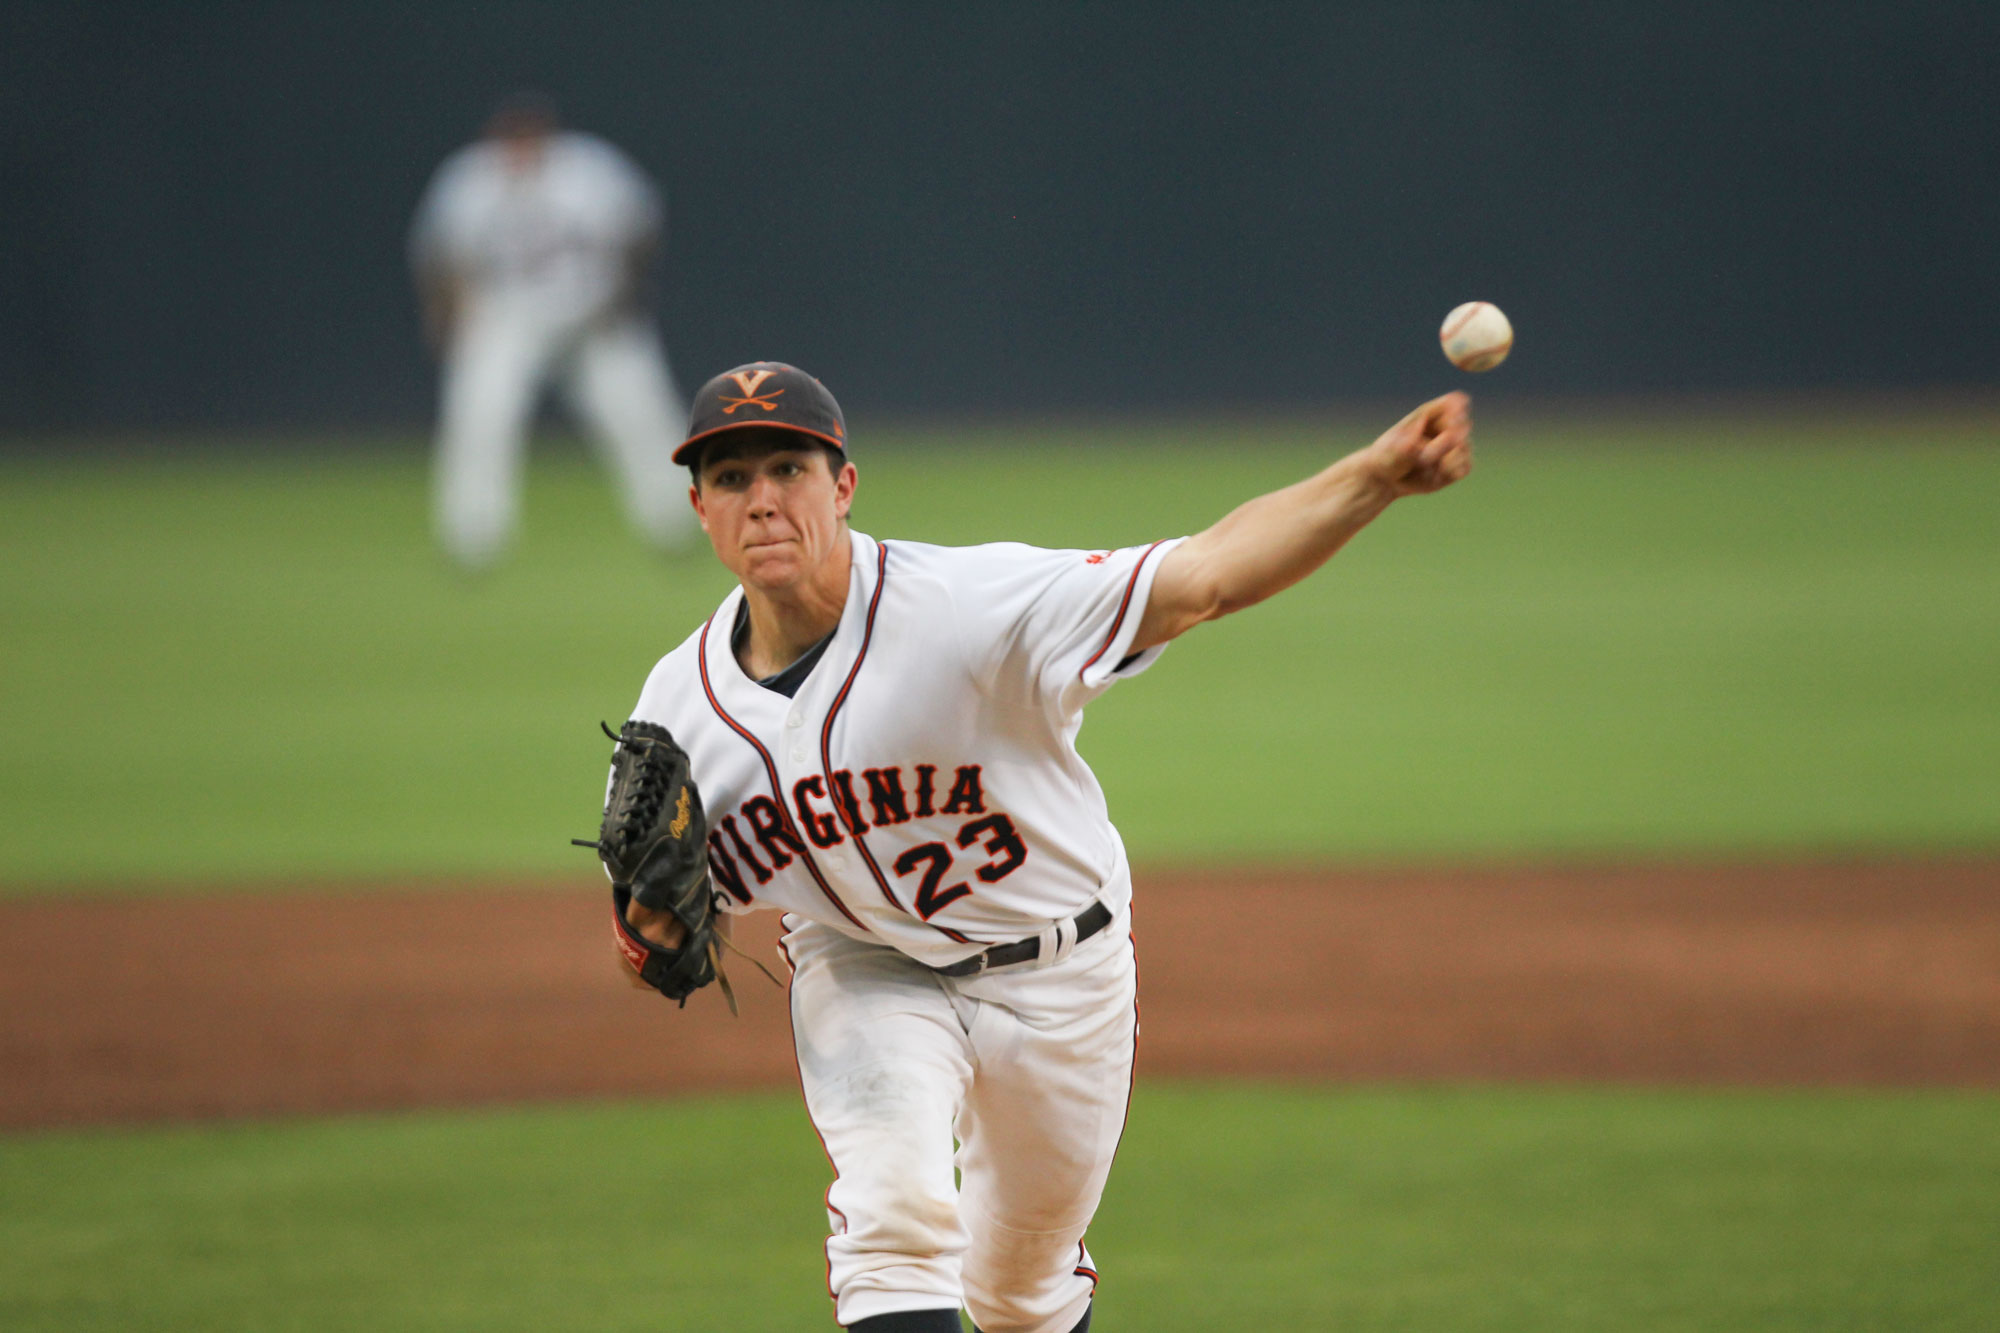 Danny Hultzen throwing a pitch during a baseball game